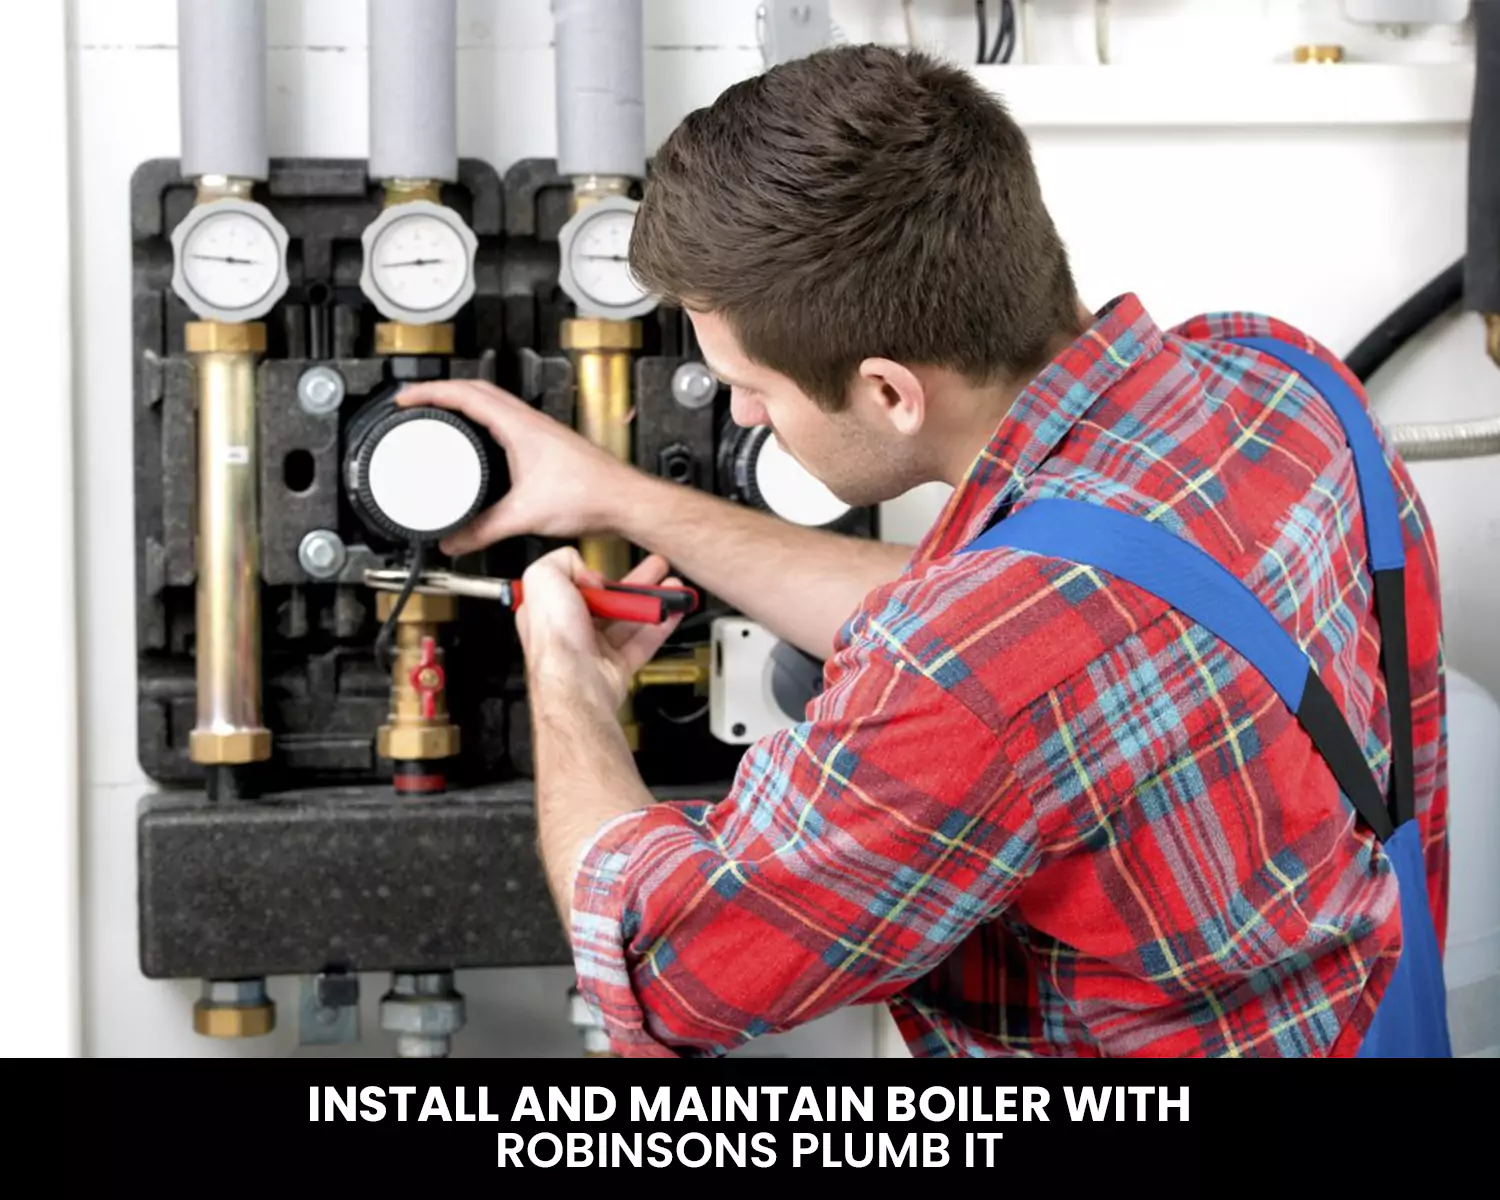 Install and Maintain Boiler With Robinsons Plumb It